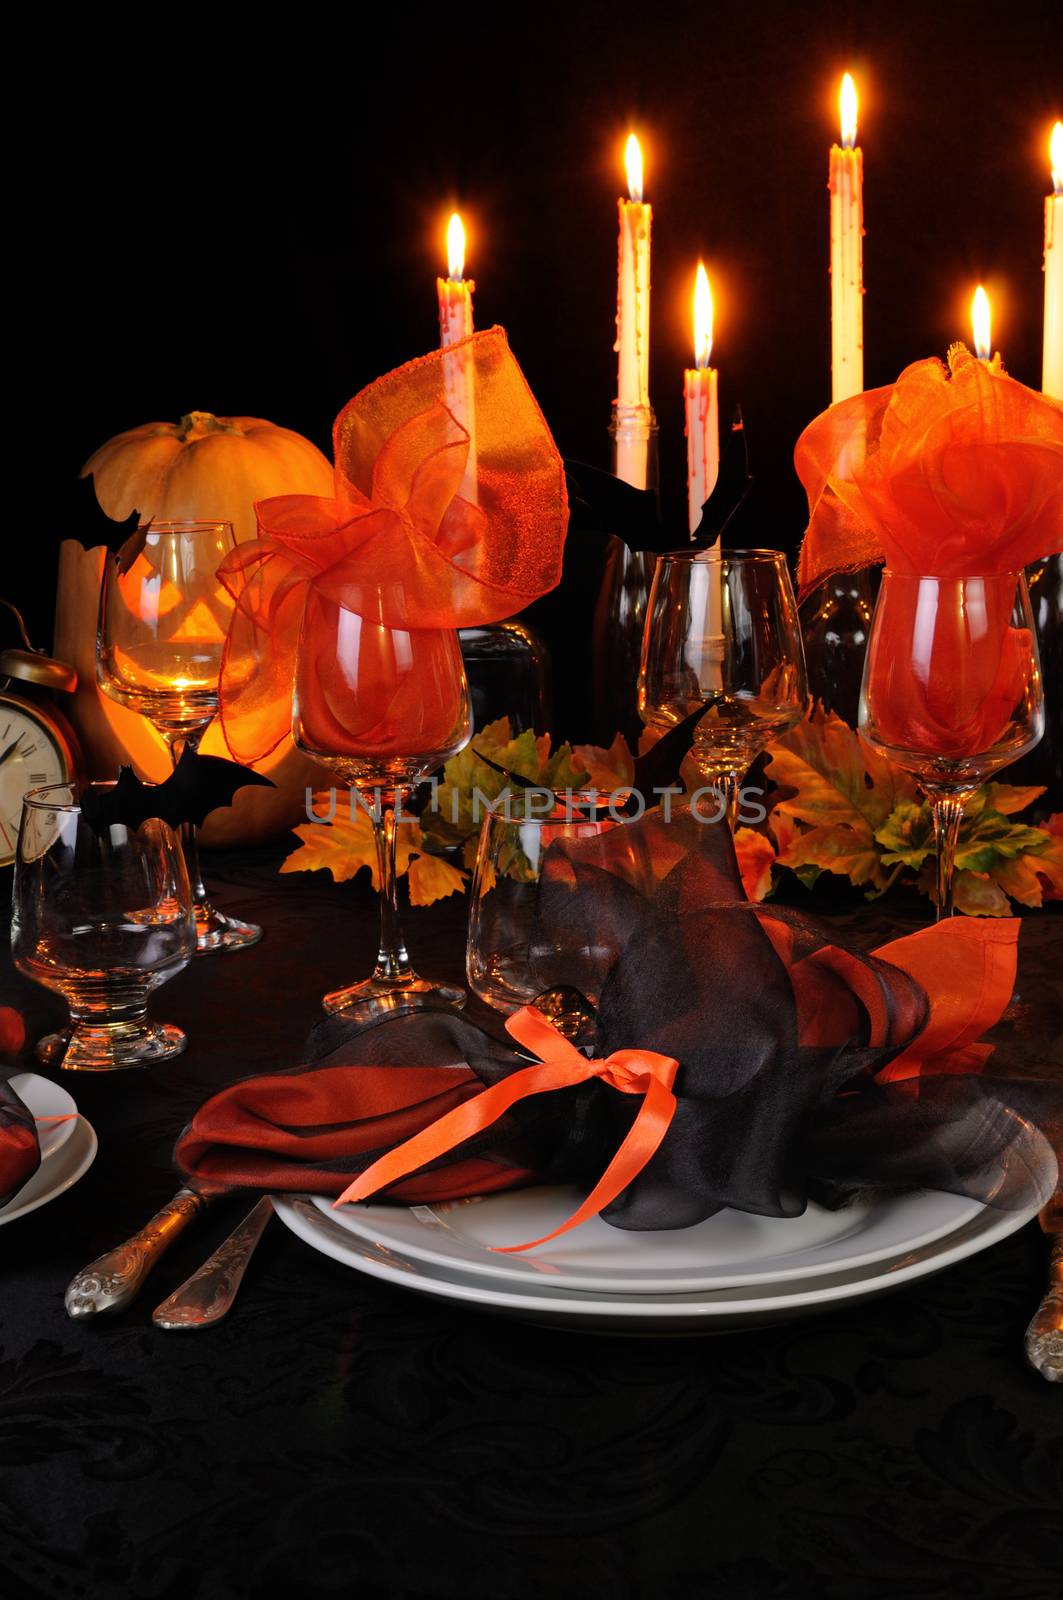 Tableware Halloween by Apolonia